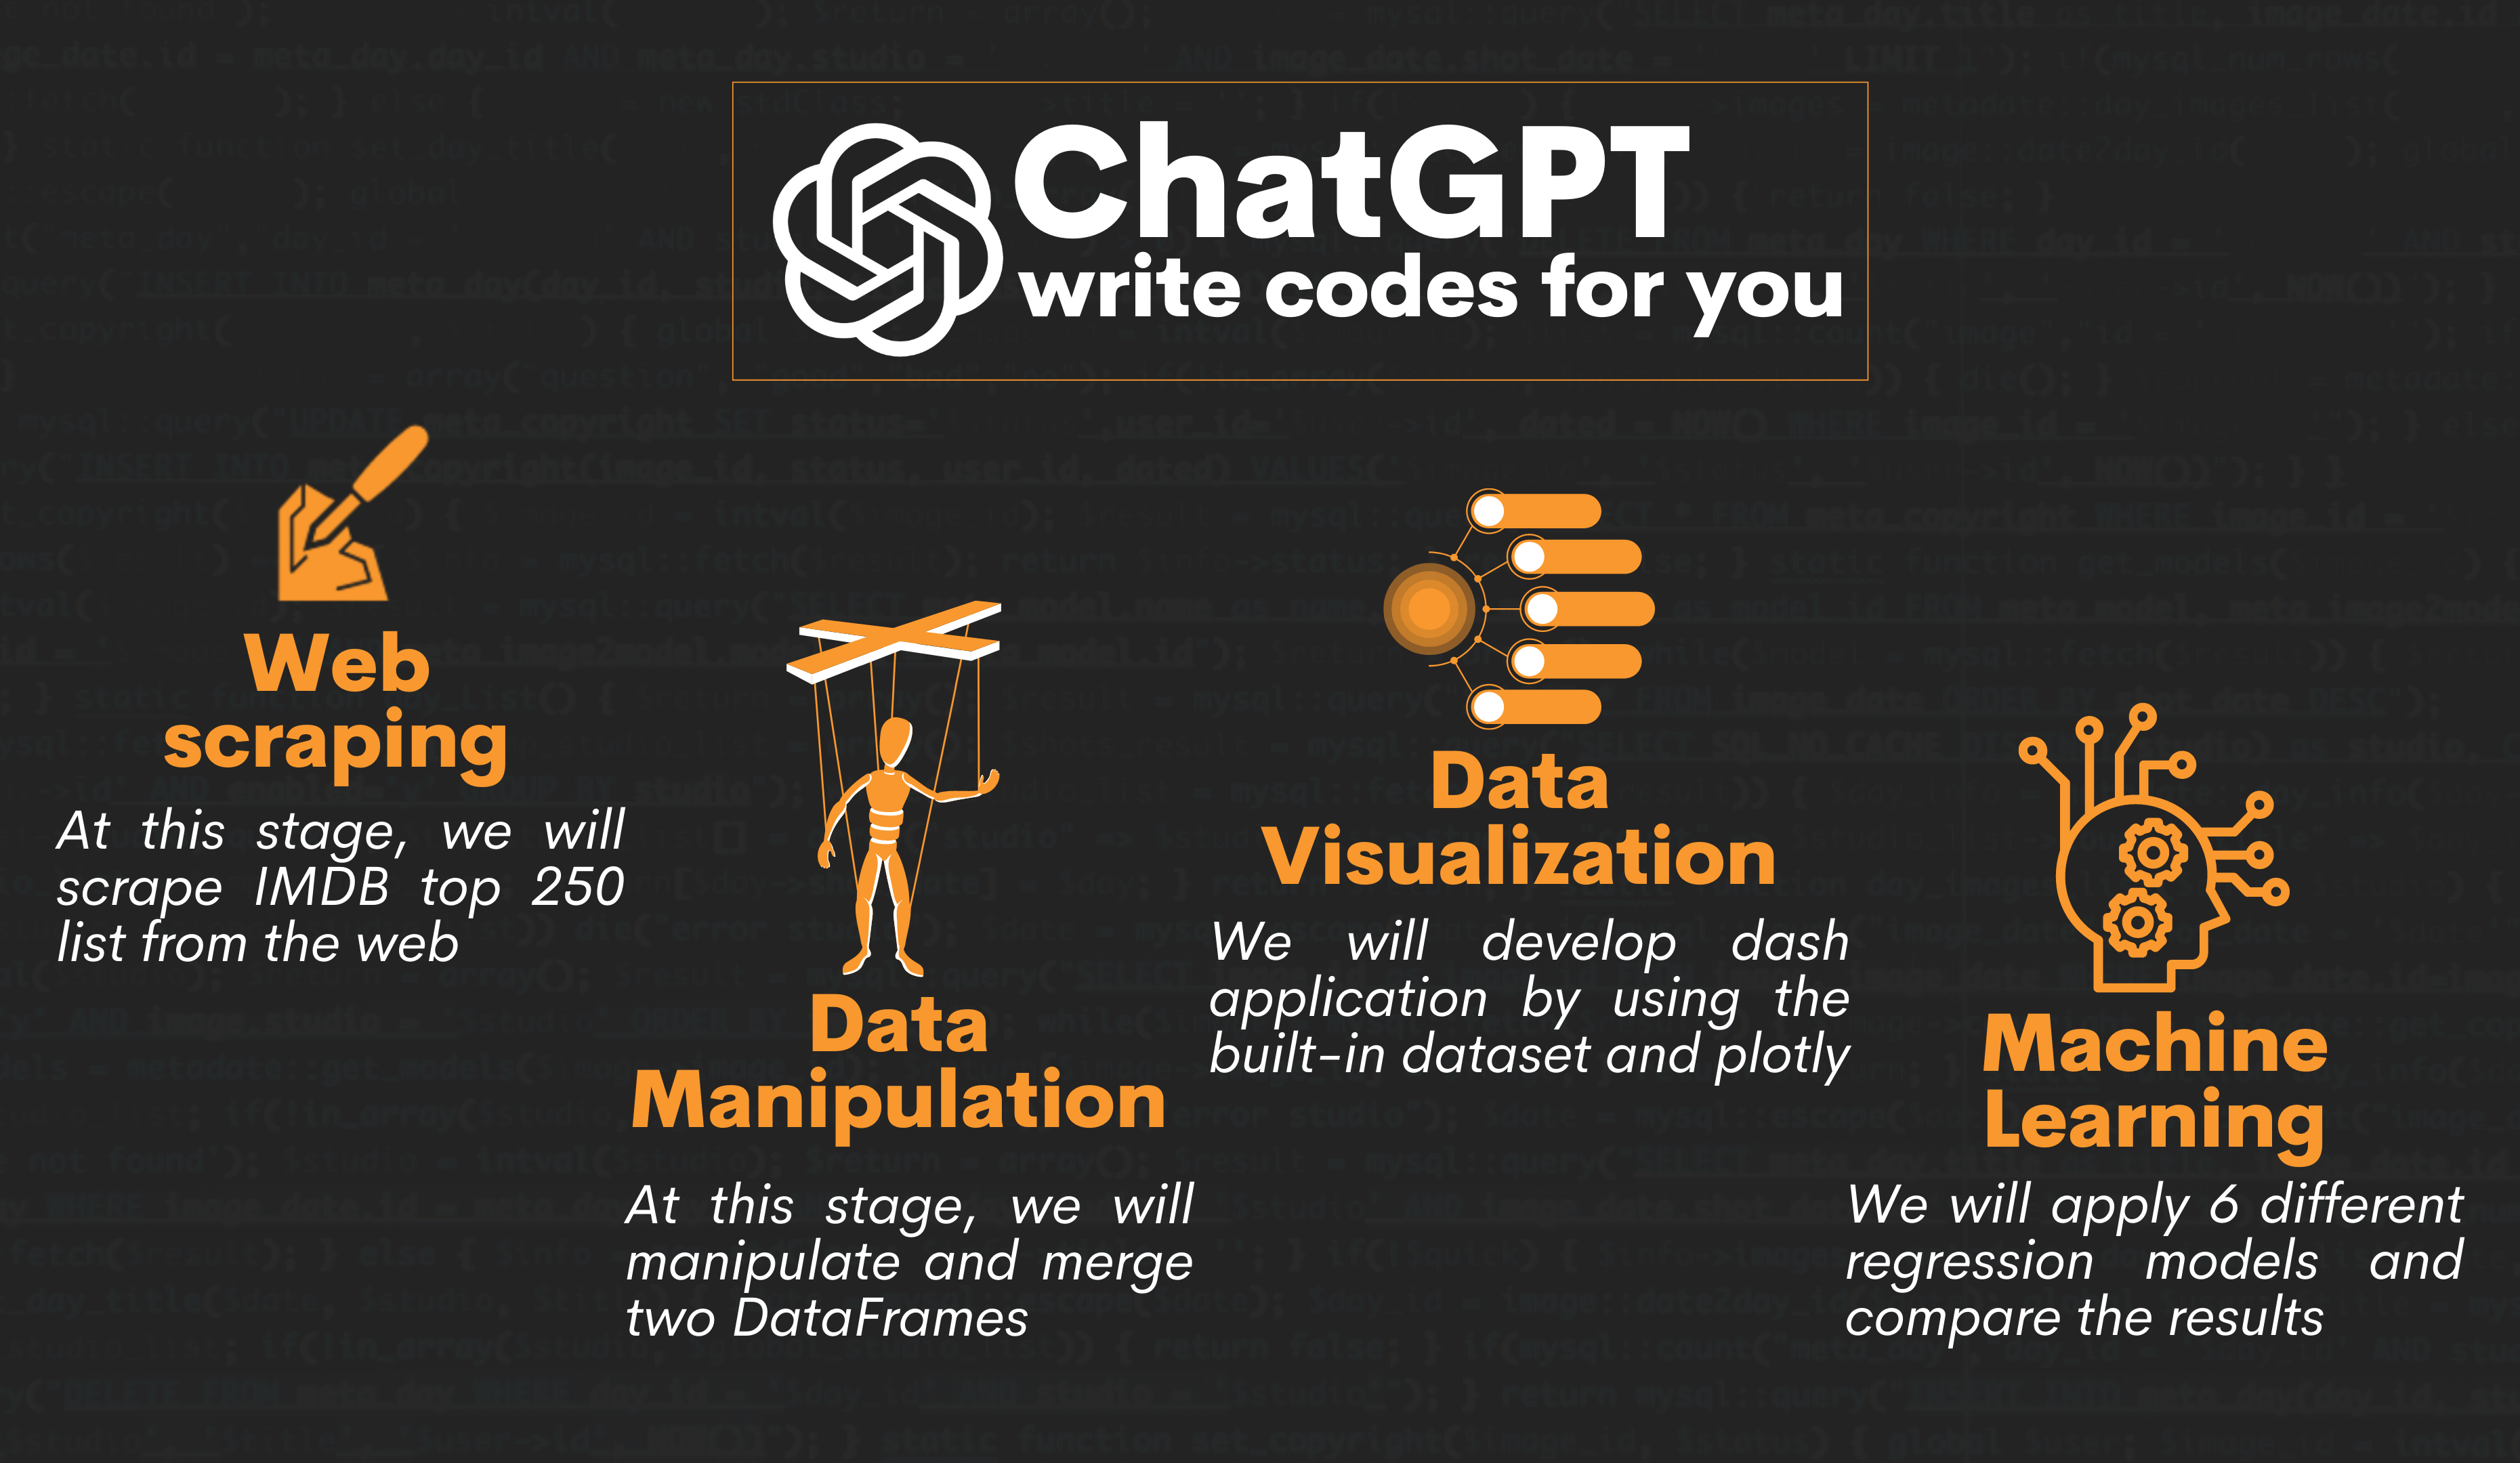 ChatGPT writes code for you